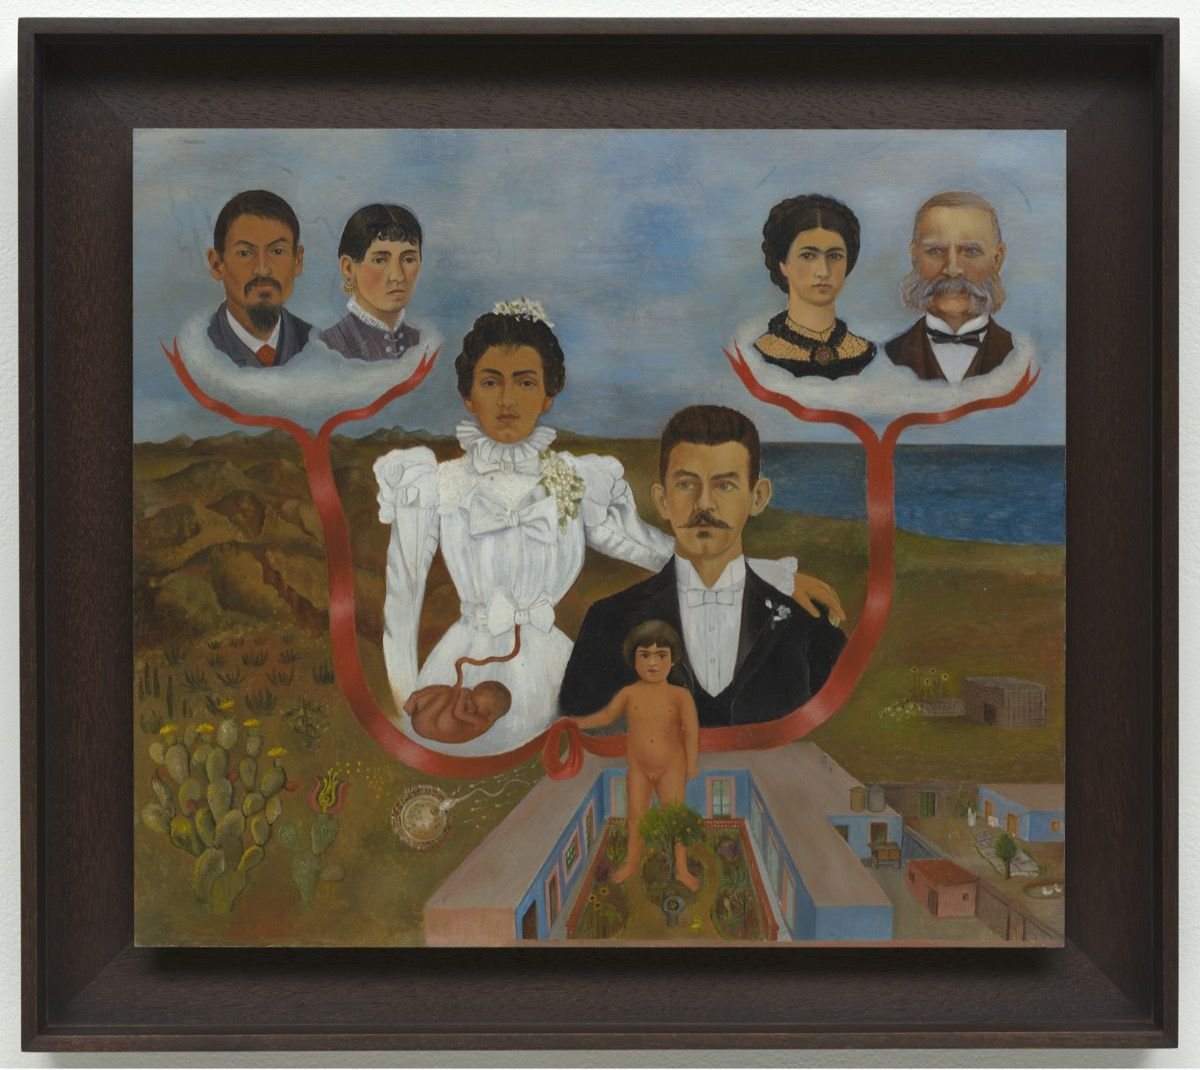 Frida Kahlo, My Grandparents, My Parents and Me, 1936